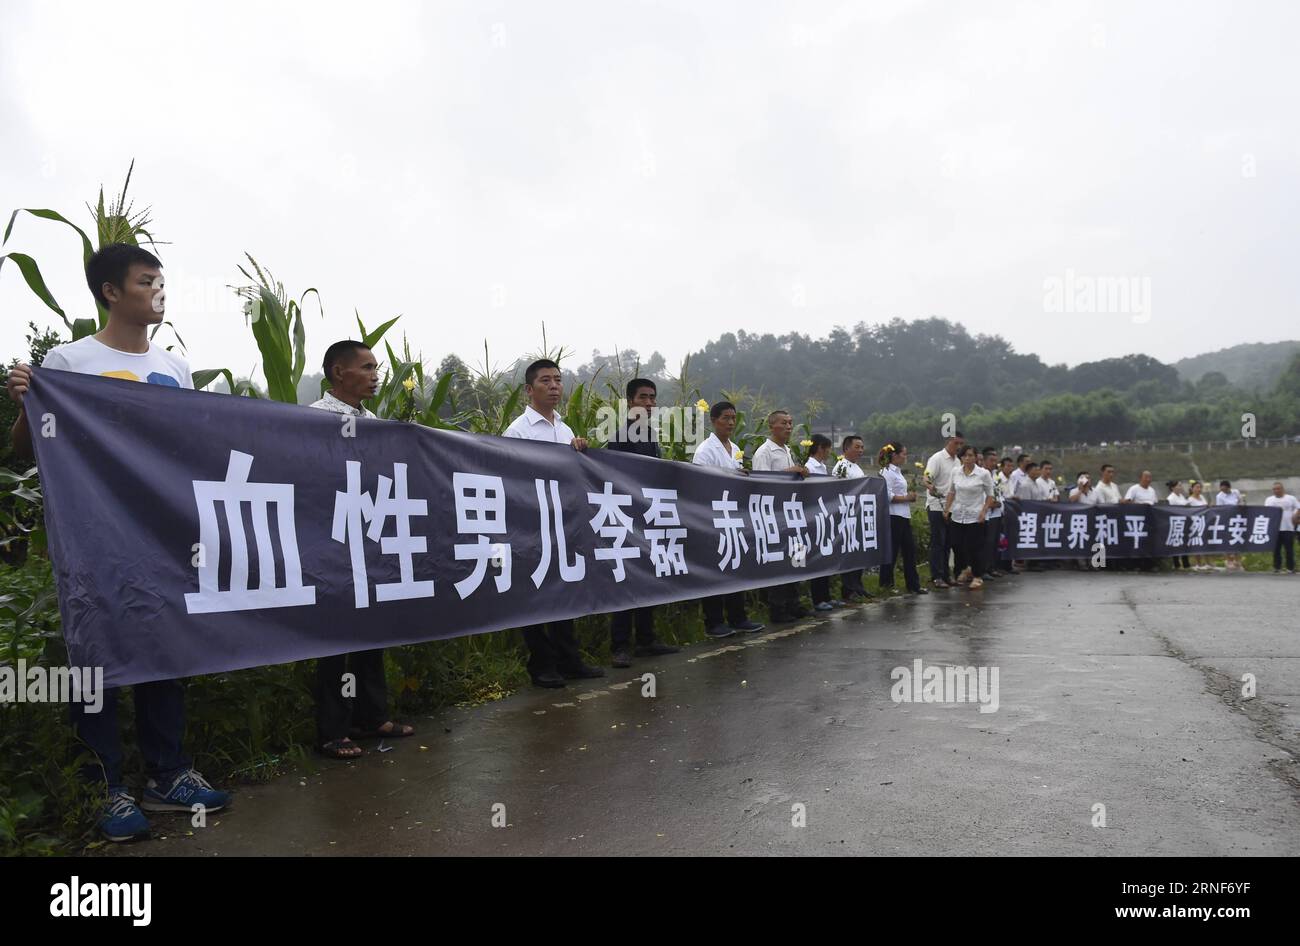 (160722) -- CHENGDU, July 22, 2016 -- People hold a banner to mourn for the deceased Chinese UN peacekeeper Li Lei during a ceremony to bury bone ash in Chengdu, capital of southwest China s Sichuan Province, July 22, 2016. Li Lei and Yang Shupeng were killed on the evening of July 10 after a mortar shell hit their armored vehicle during fighting between two army factions in Juba, capital of South Sudan. ) (lfj) CHINA-SICHUAN-CHINESE UN PEACEKEEPER-MOURNING (CN) LiuxKun PUBLICATIONxNOTxINxCHN   160722 Chengdu July 22 2016 Celebrities Hold a Banner to Morne for The deceased Chinese UN Peacekeep Stock Photo